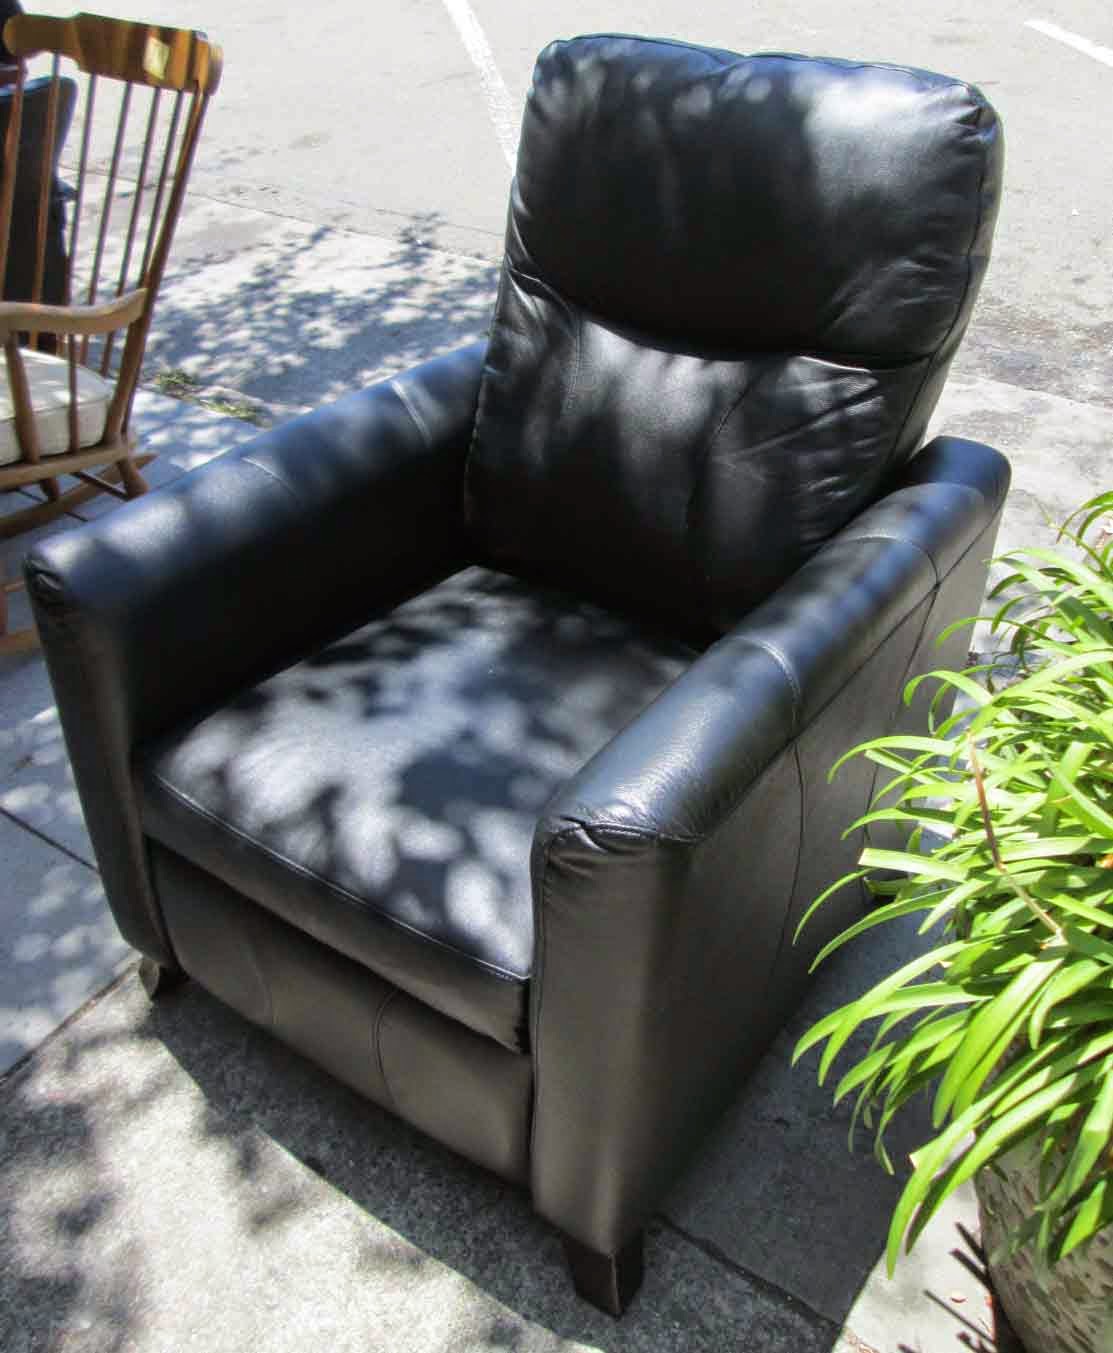 UHURU FURNITURE & COLLECTIBLES: SOLD Slim and Sleek Faux Leather Recliner - $115